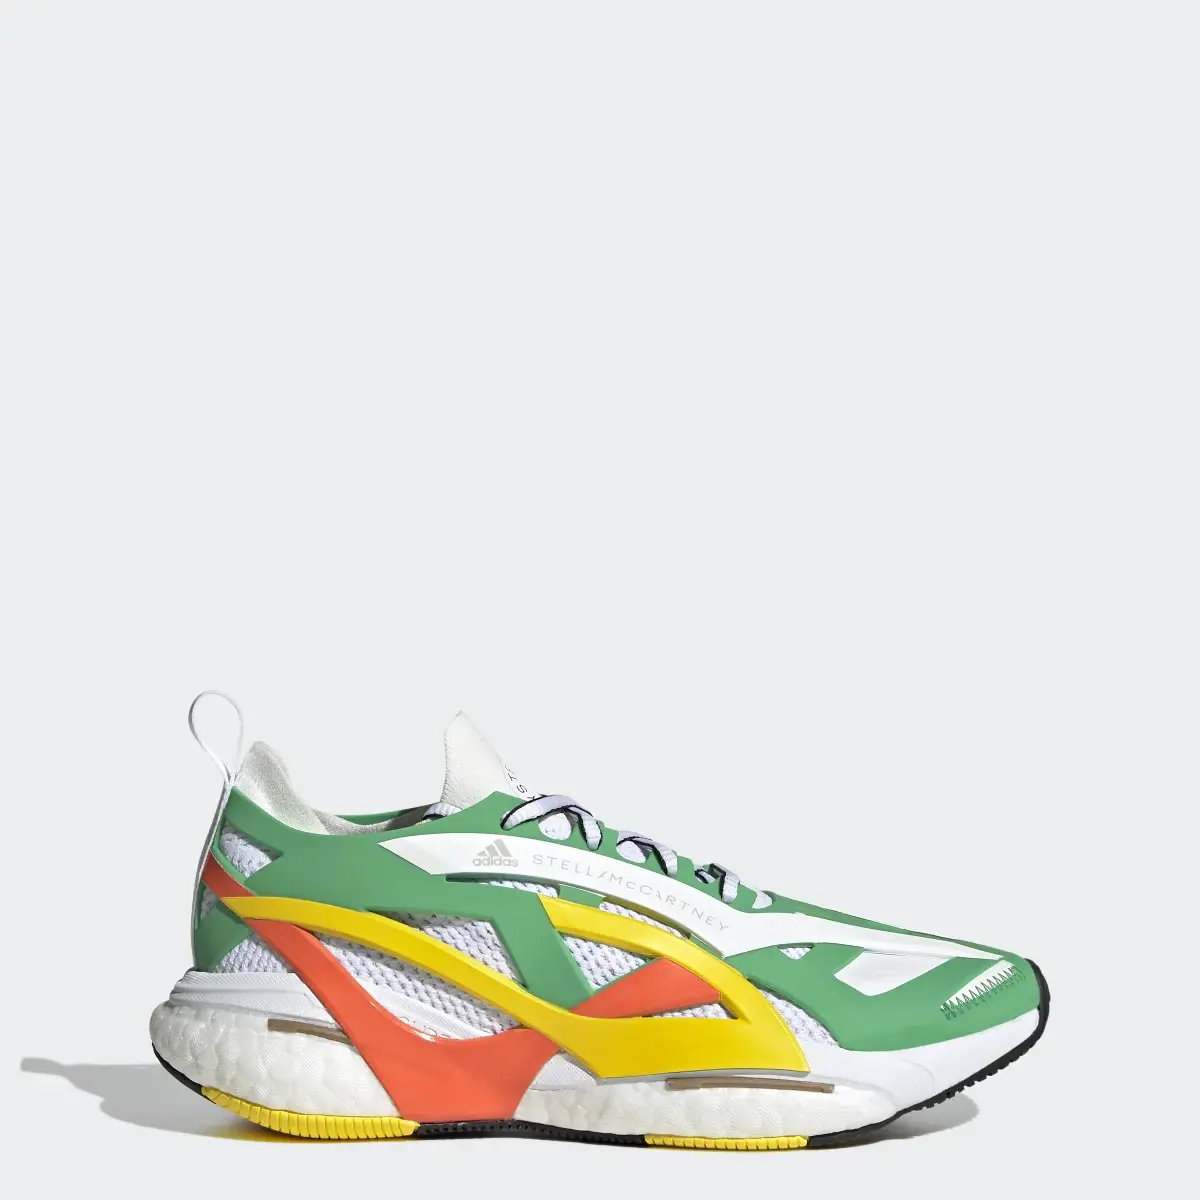 Adidas by Stella McCartney Solarglide Running Shoes. 1